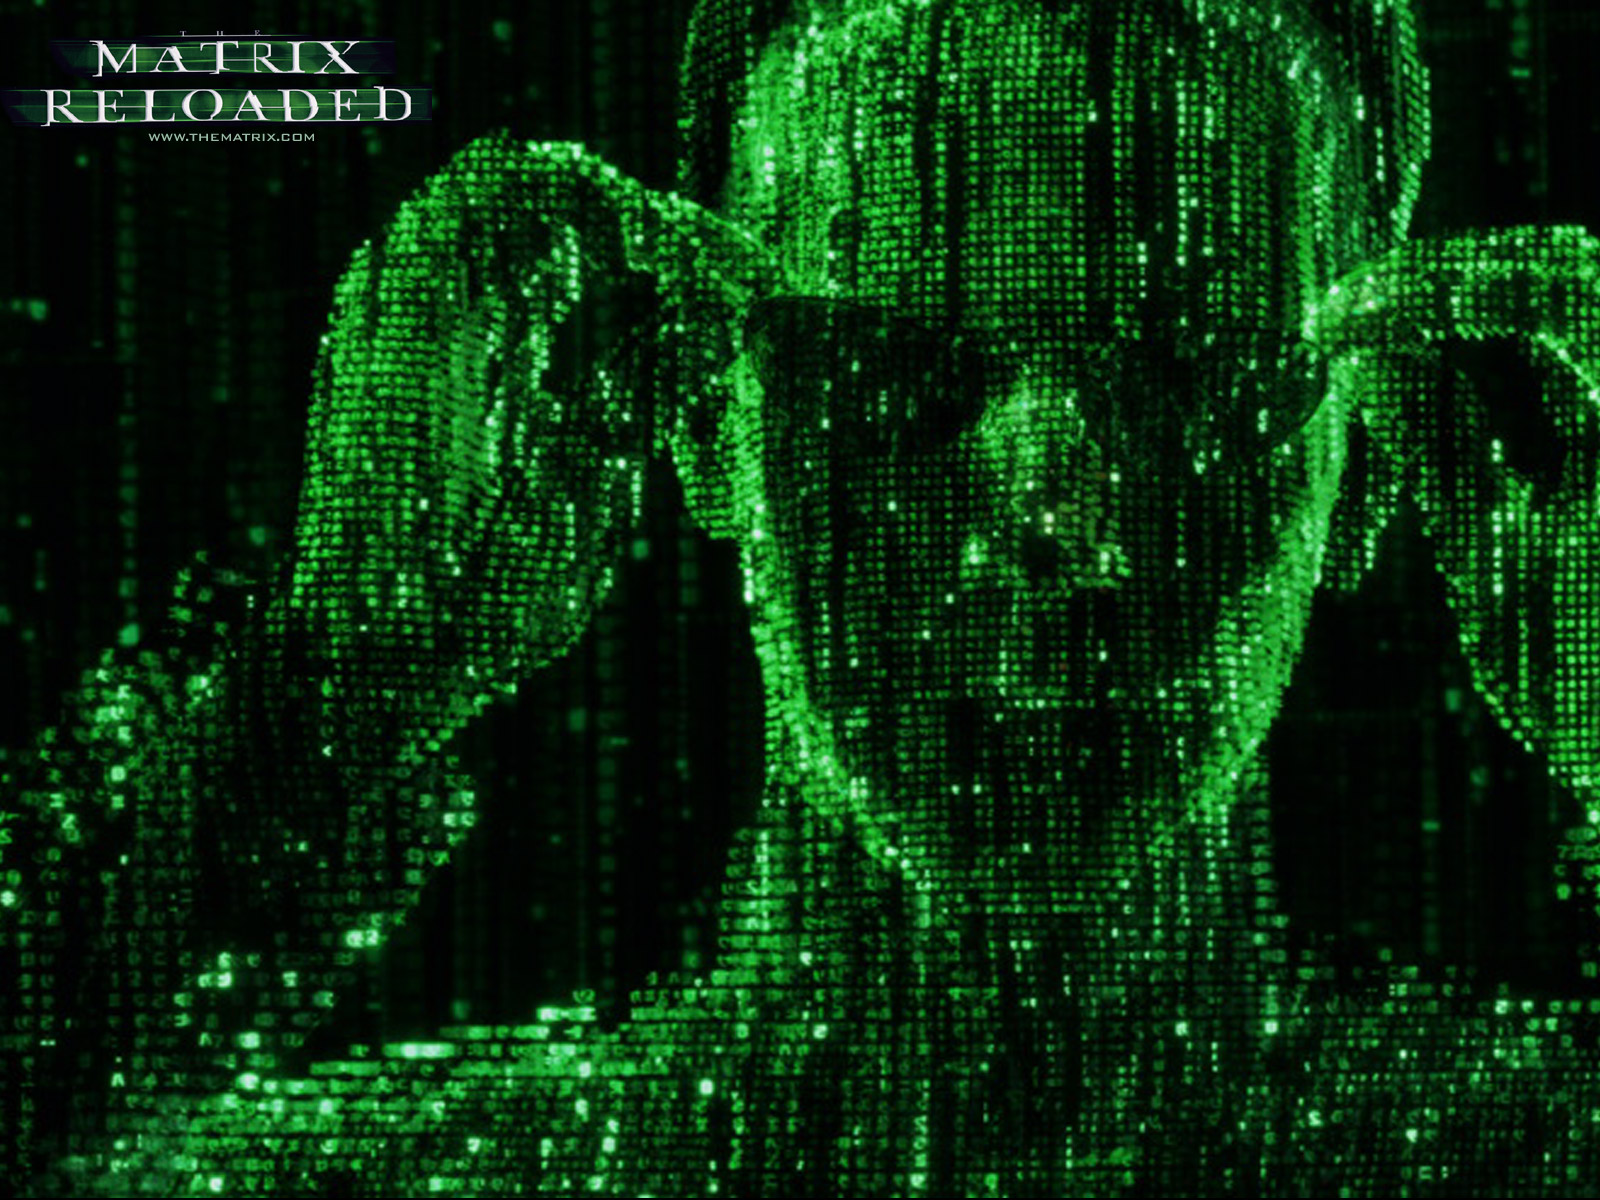 Matrix Reloaded wallpapers and images   wallpapers pictures photos 1600x1200